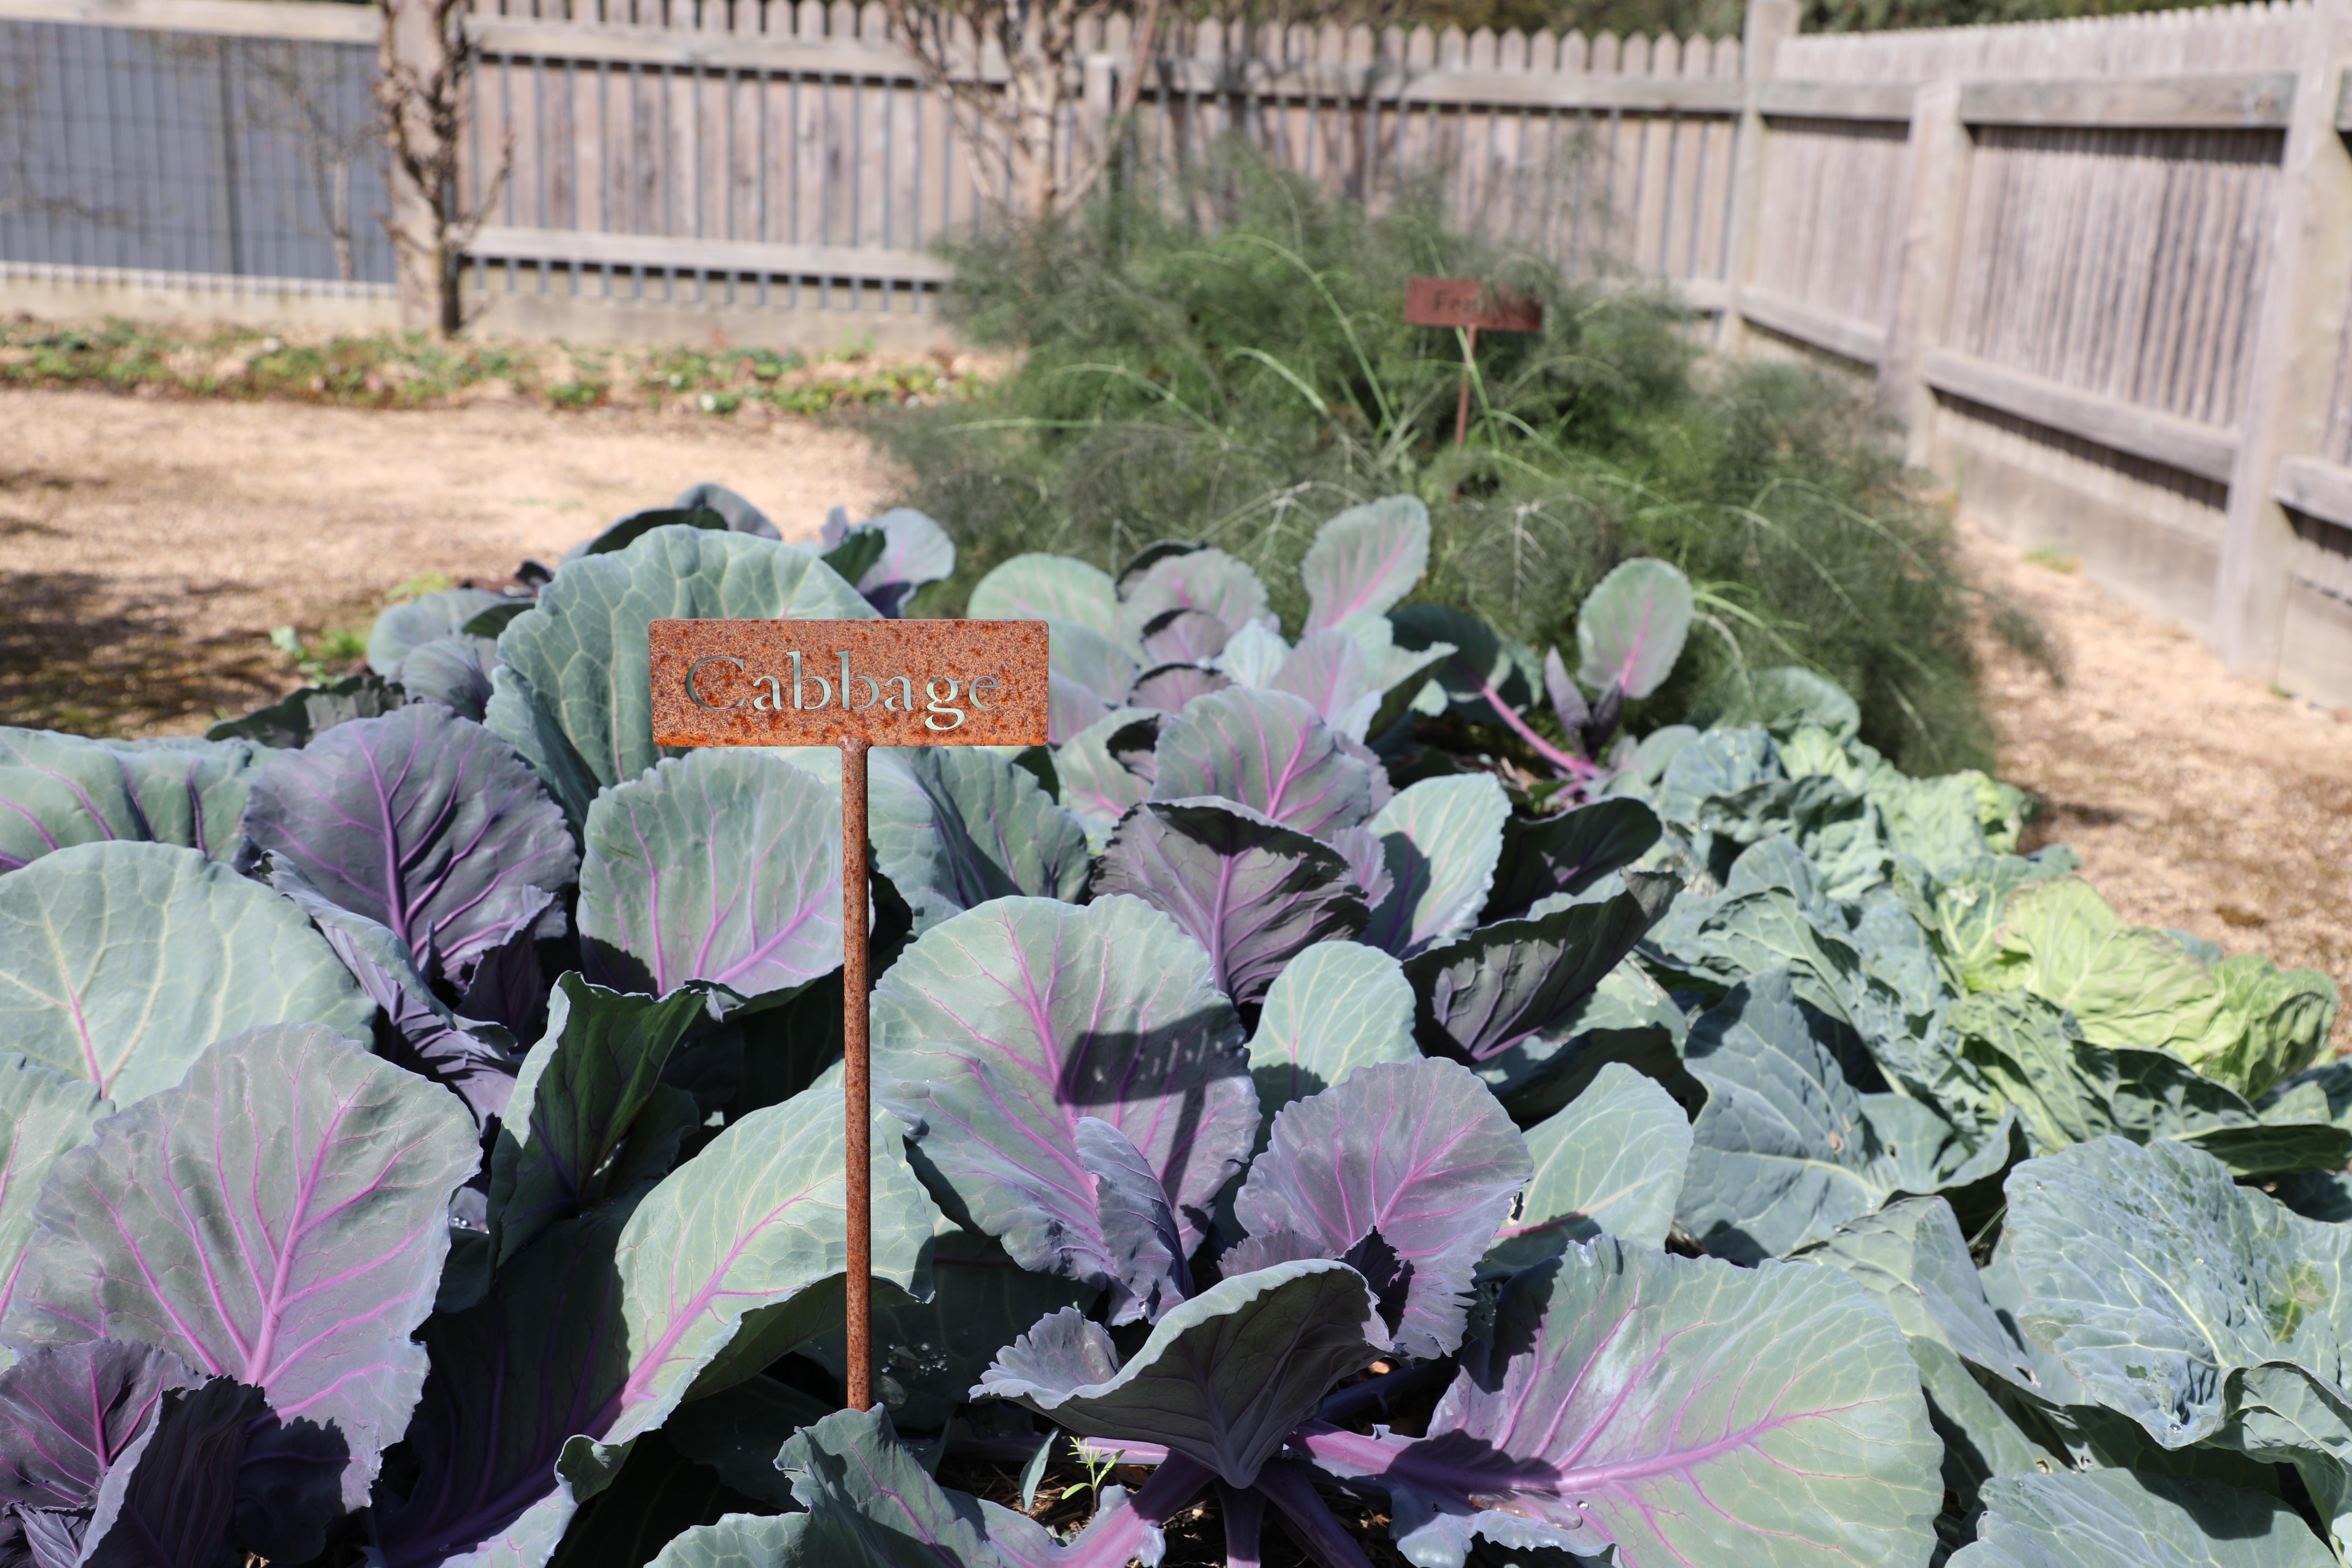 Cabbage grown at the Kitchen Garden at Government House.